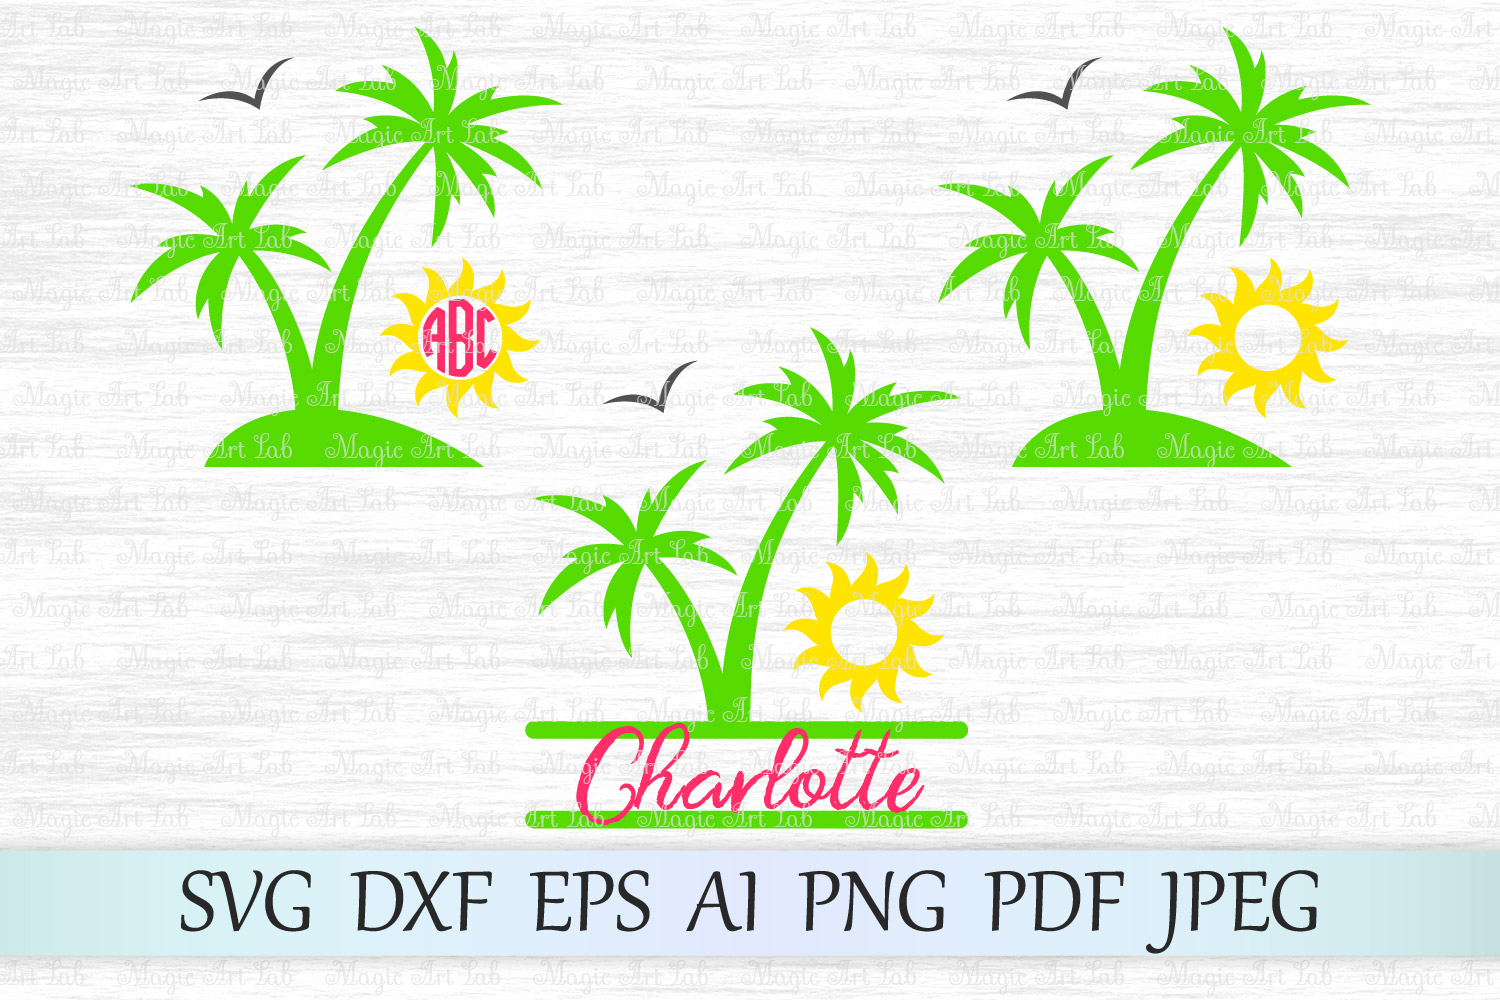 Download Free SVG Cut File - Palm Tree SVG Files for Cutting Summer Cricut ...